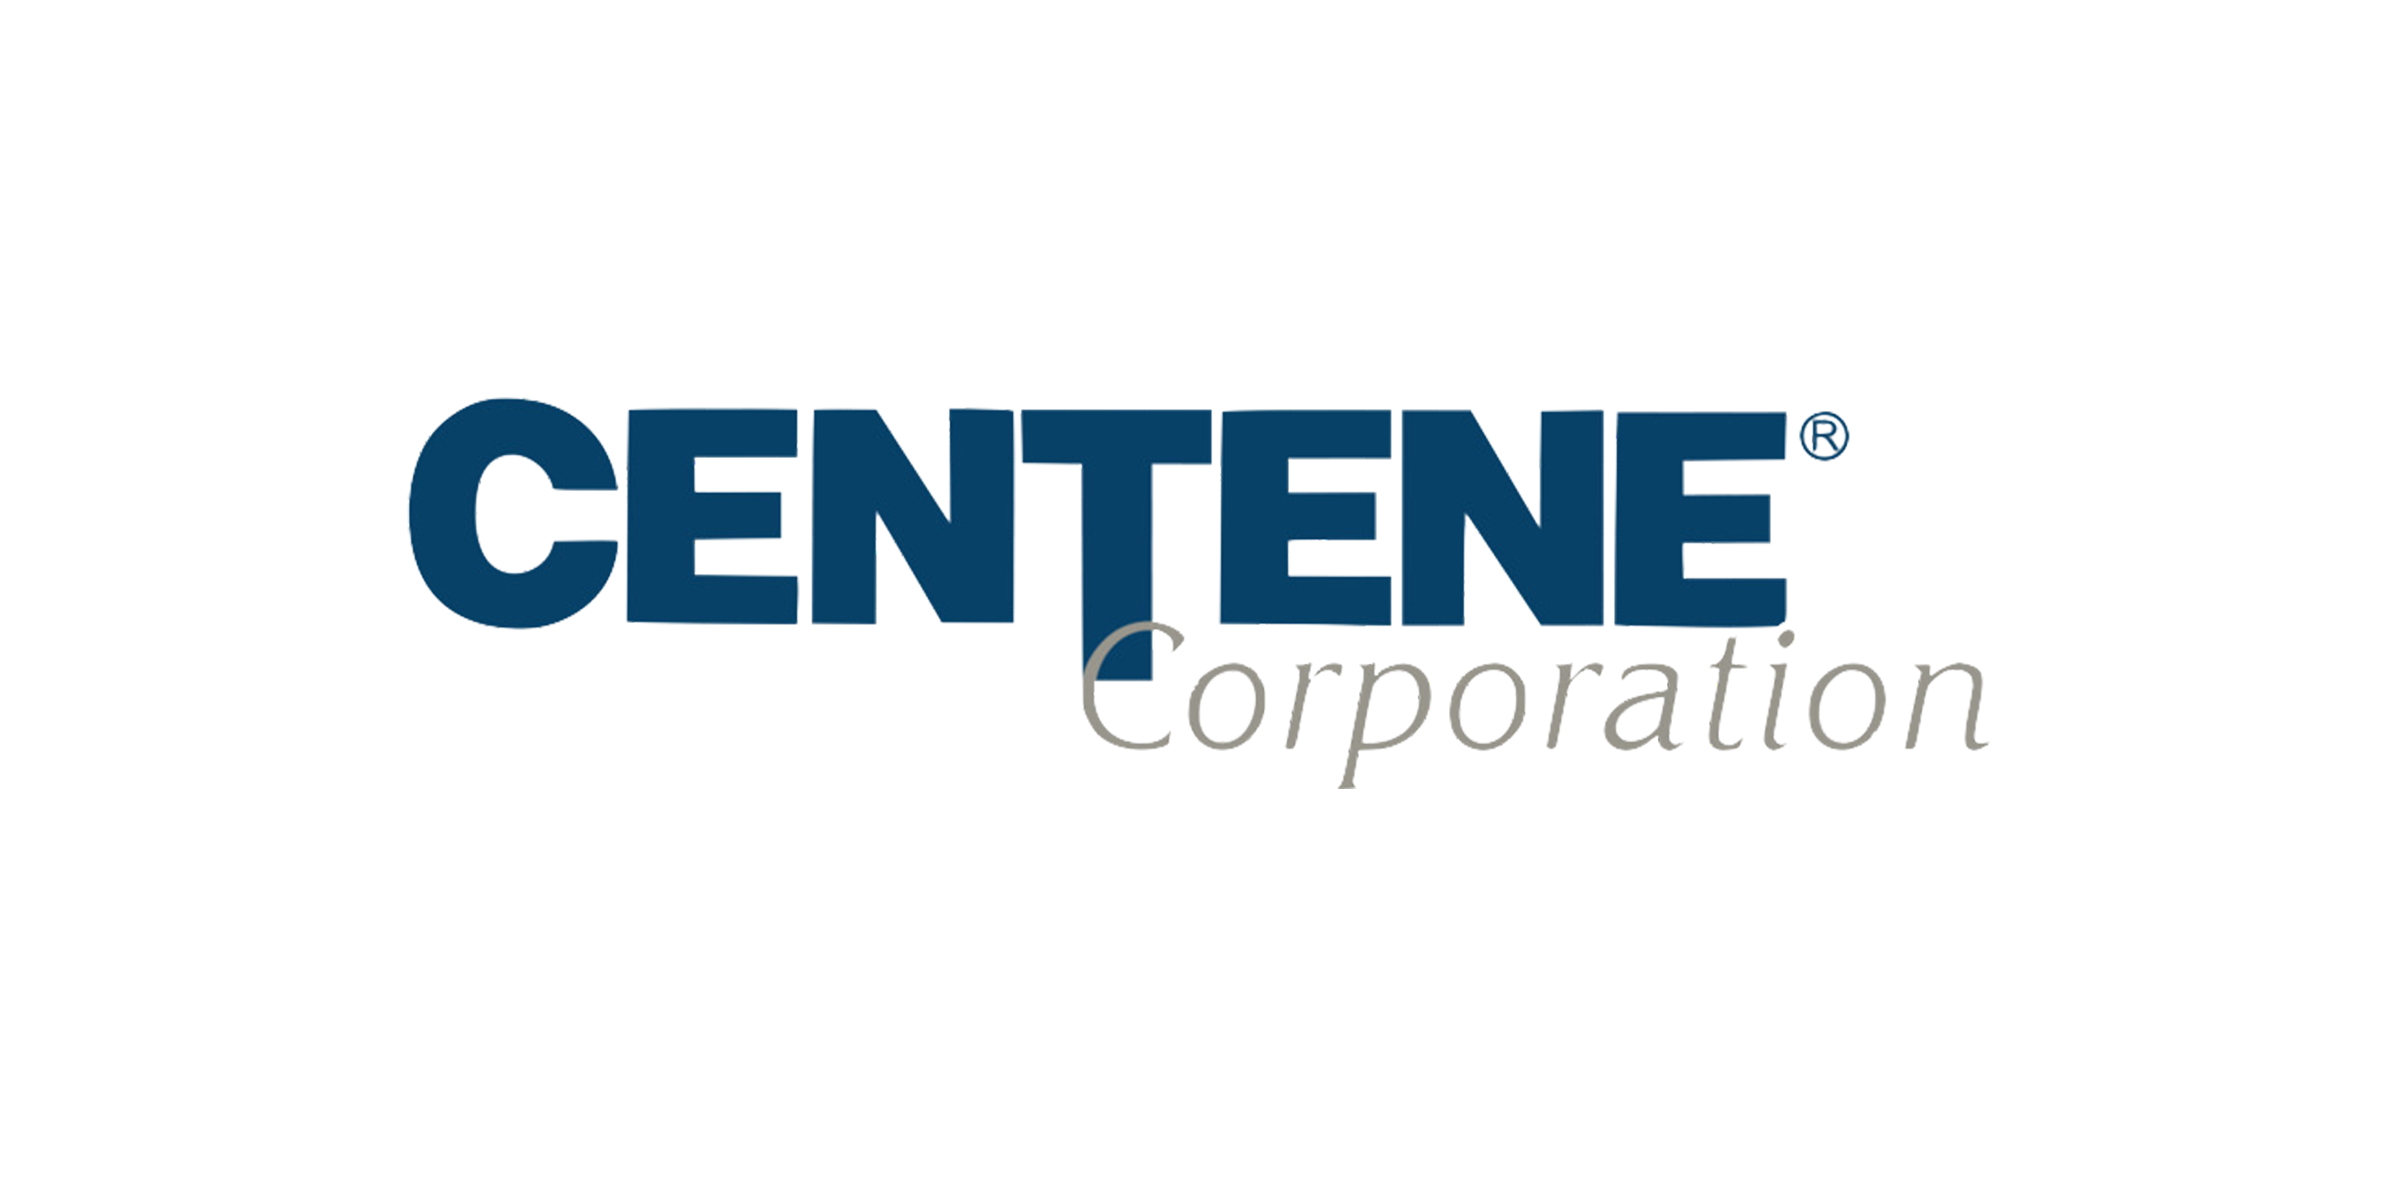 3-Centene Corp.png